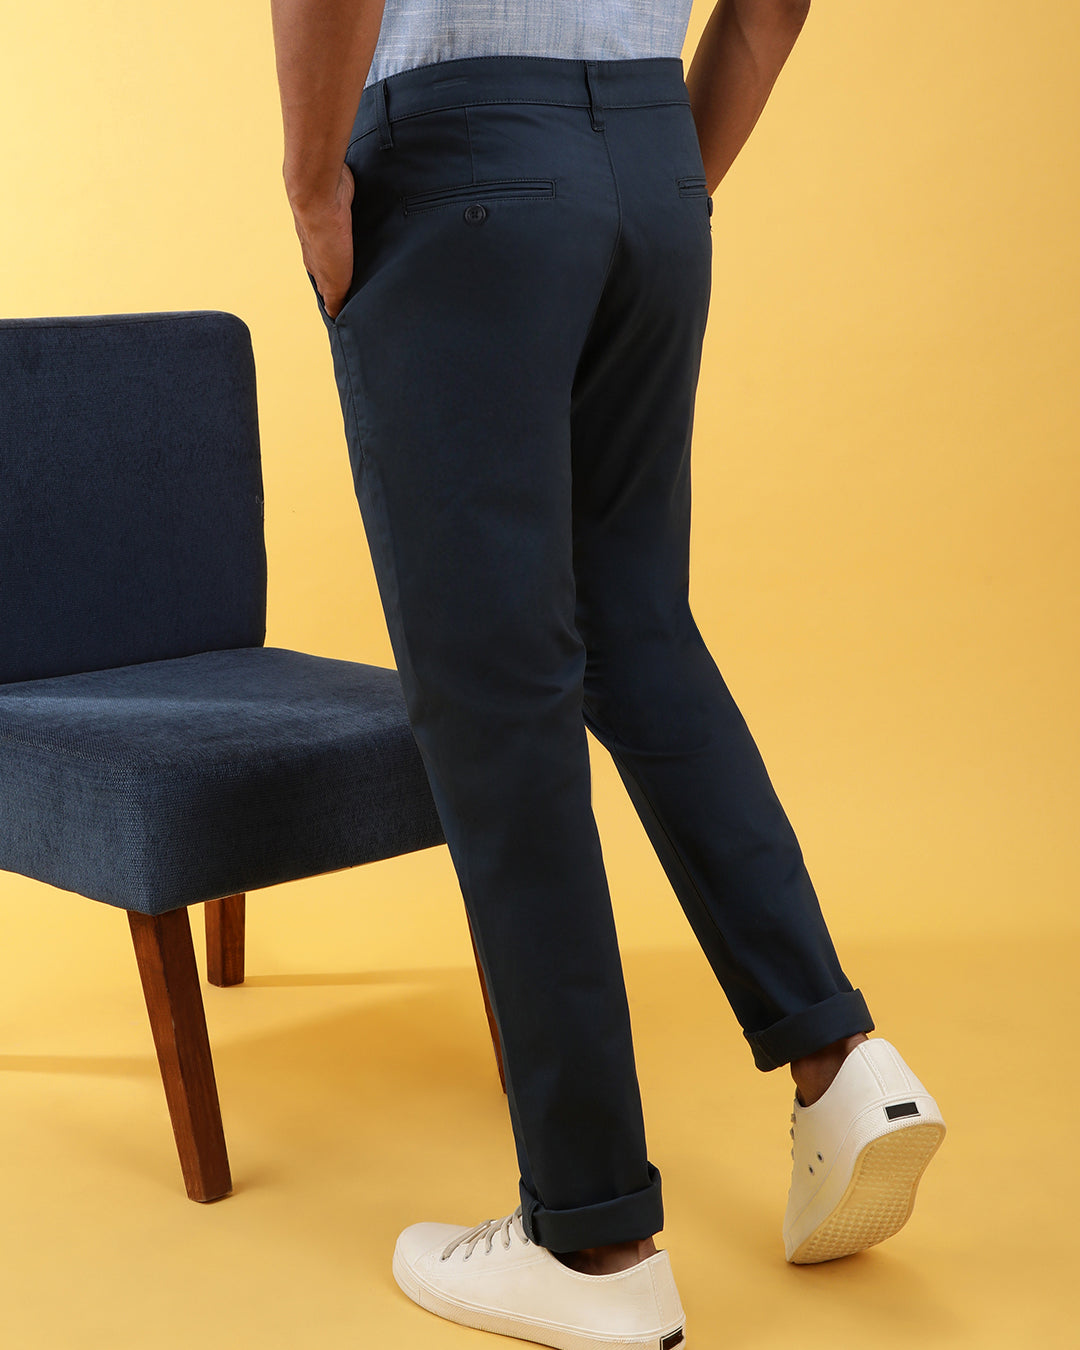 Classic Stretch Navy Chino With Peached Fabric – Crocodile